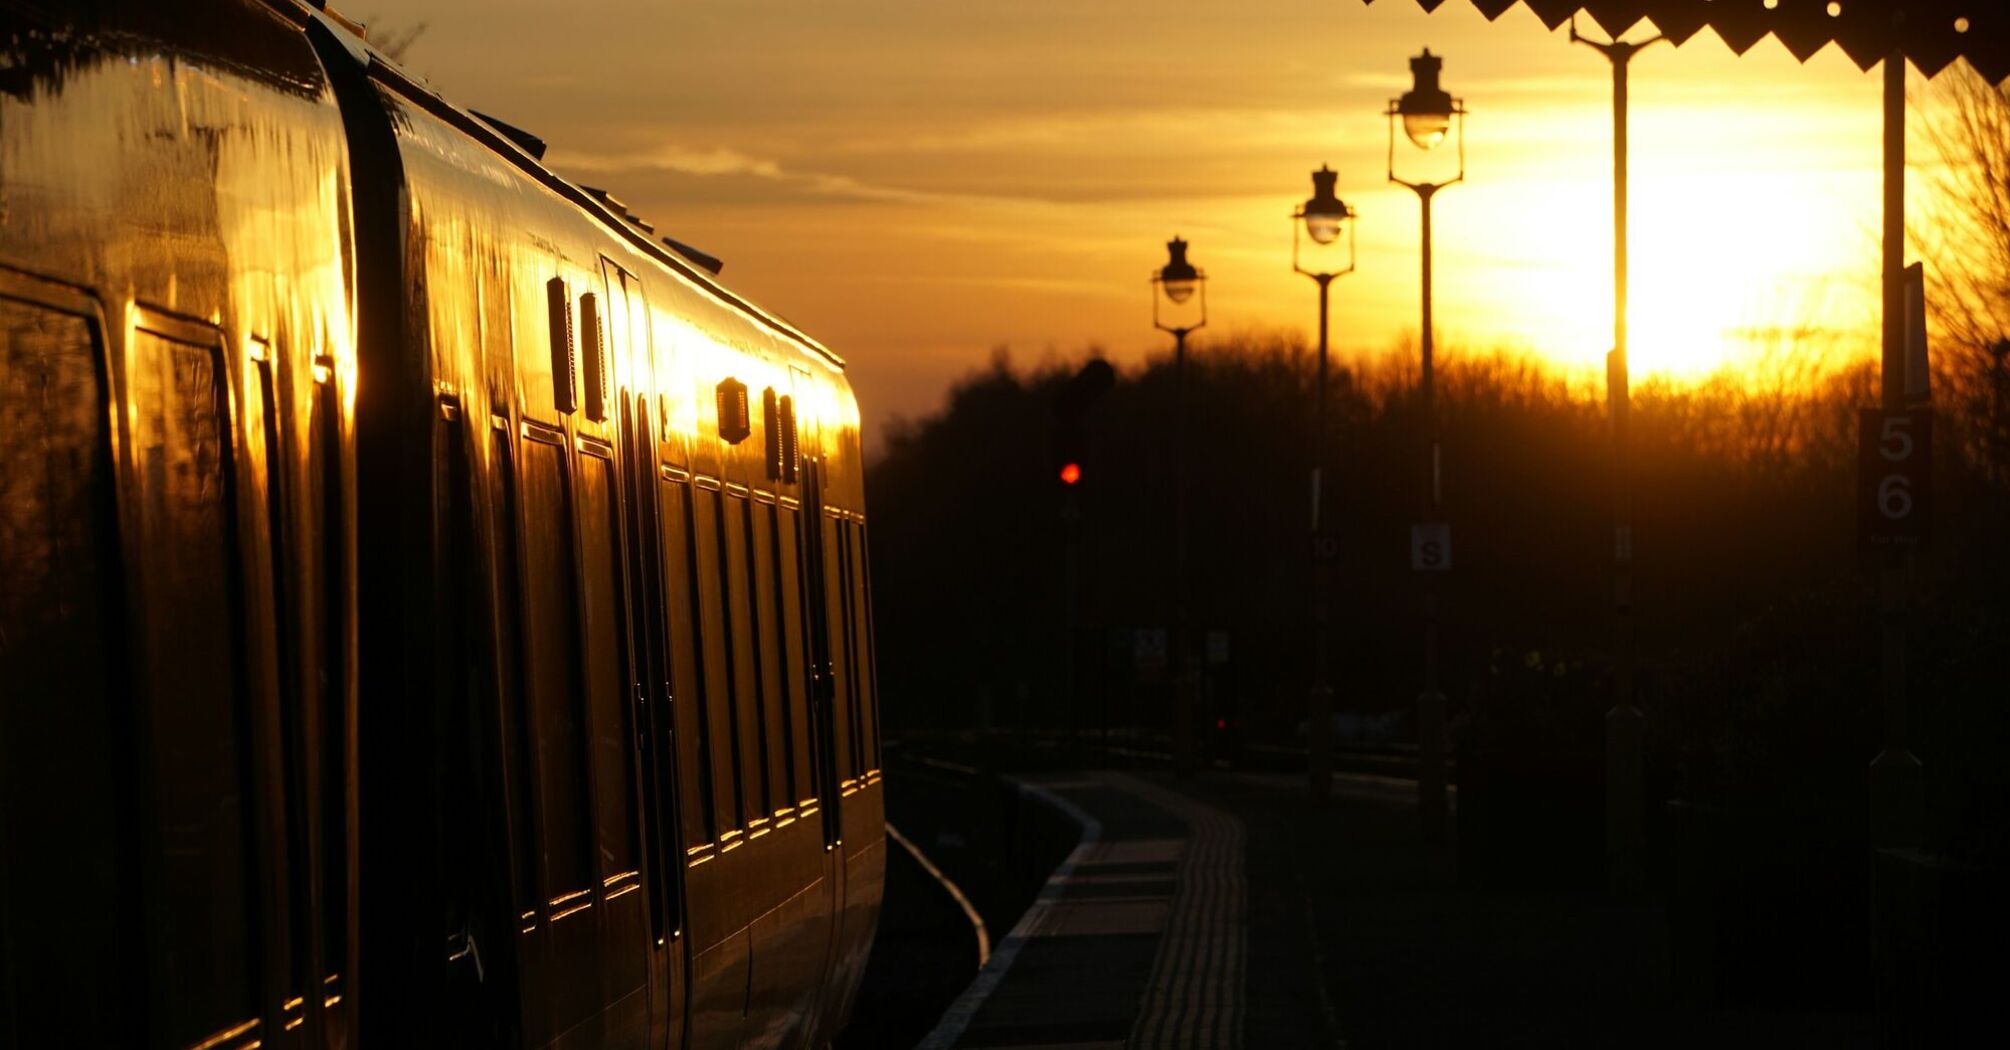 Train at a railway station during sunset 